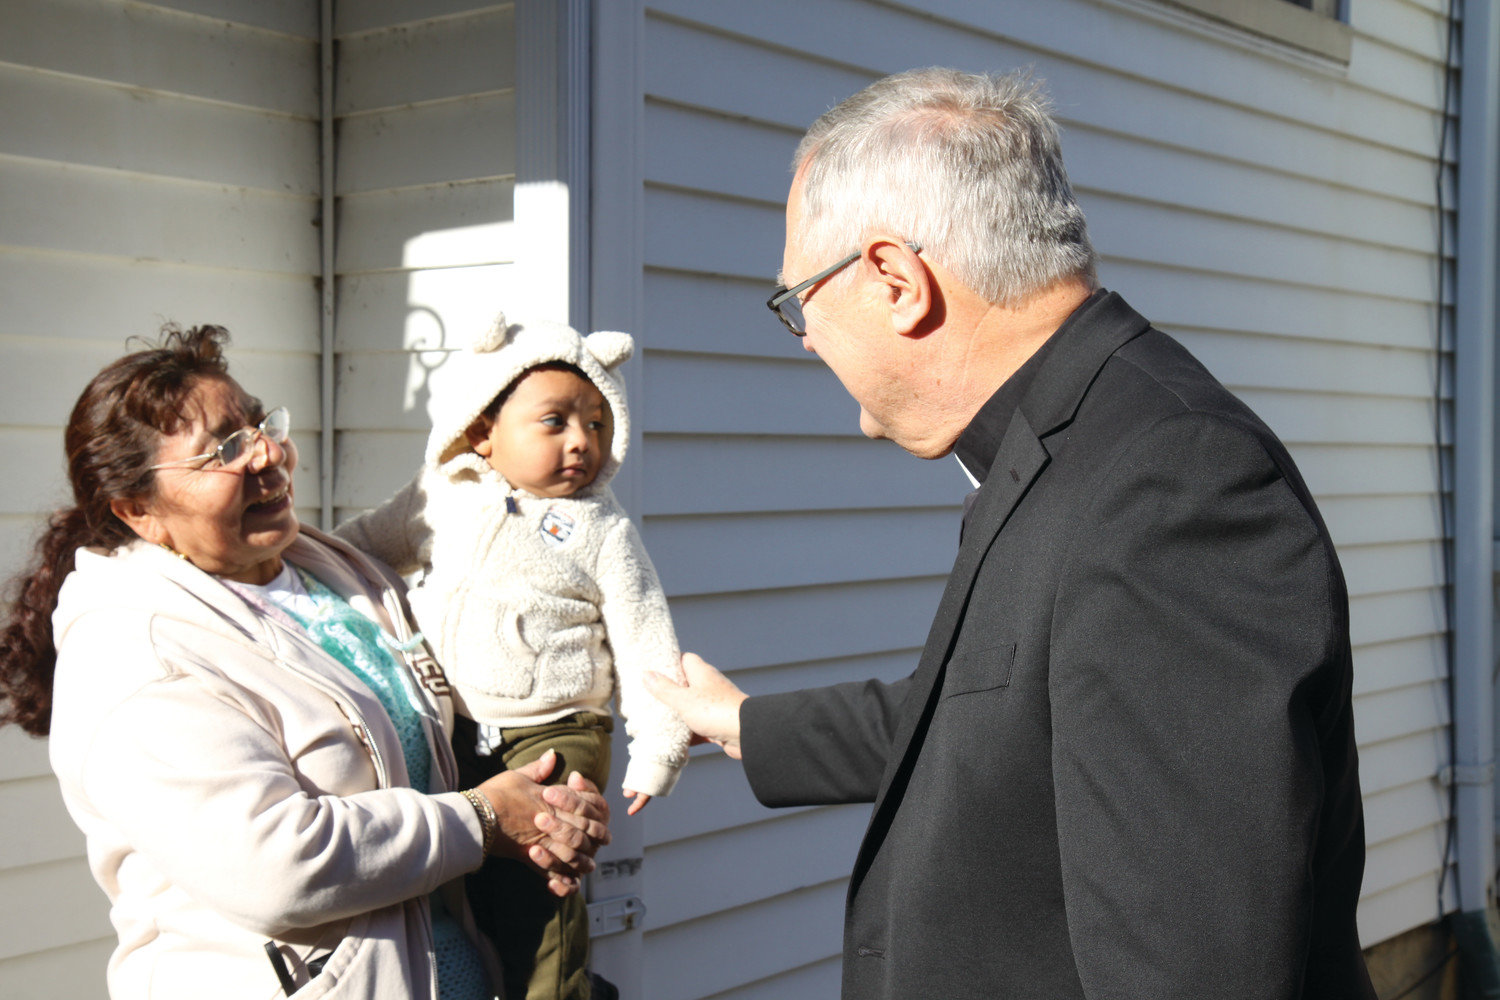 In this 2017 photo, Bishop Thomas J. Tobin greets one-year-old Liam Andres and his grandmother, Consuelo Robles, outside the home of Liam’s parents, Otoniel Andres and Natalia Zapata. The family was a beneficiary of the “Keep the Heat On” diocesan emergency heating assistance program.